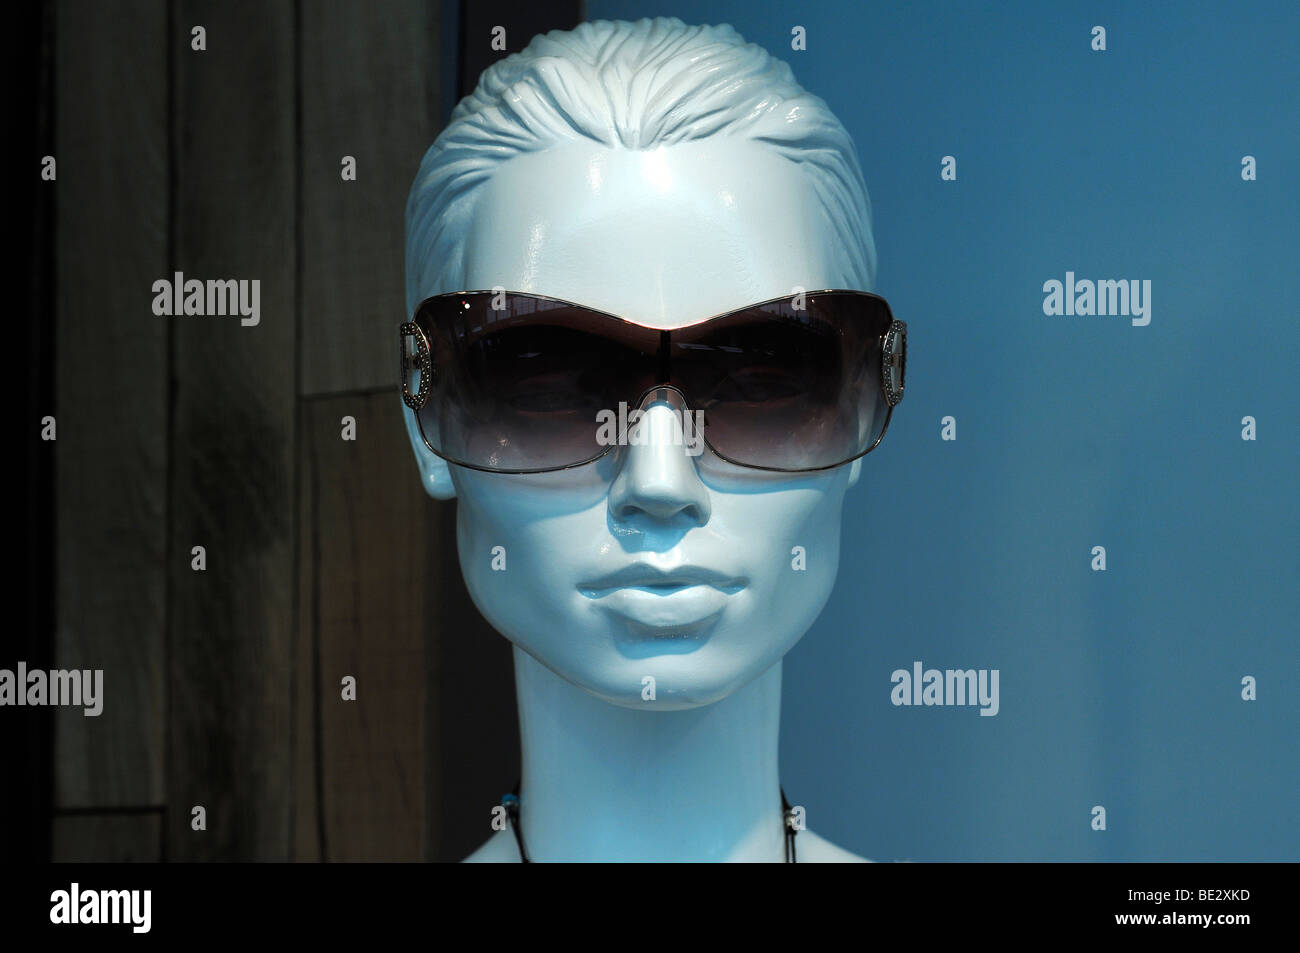 White female mannequin with sunglasses in the fashion store, Burton upon Trent, Staffordshire, England, Europe Stock Photo